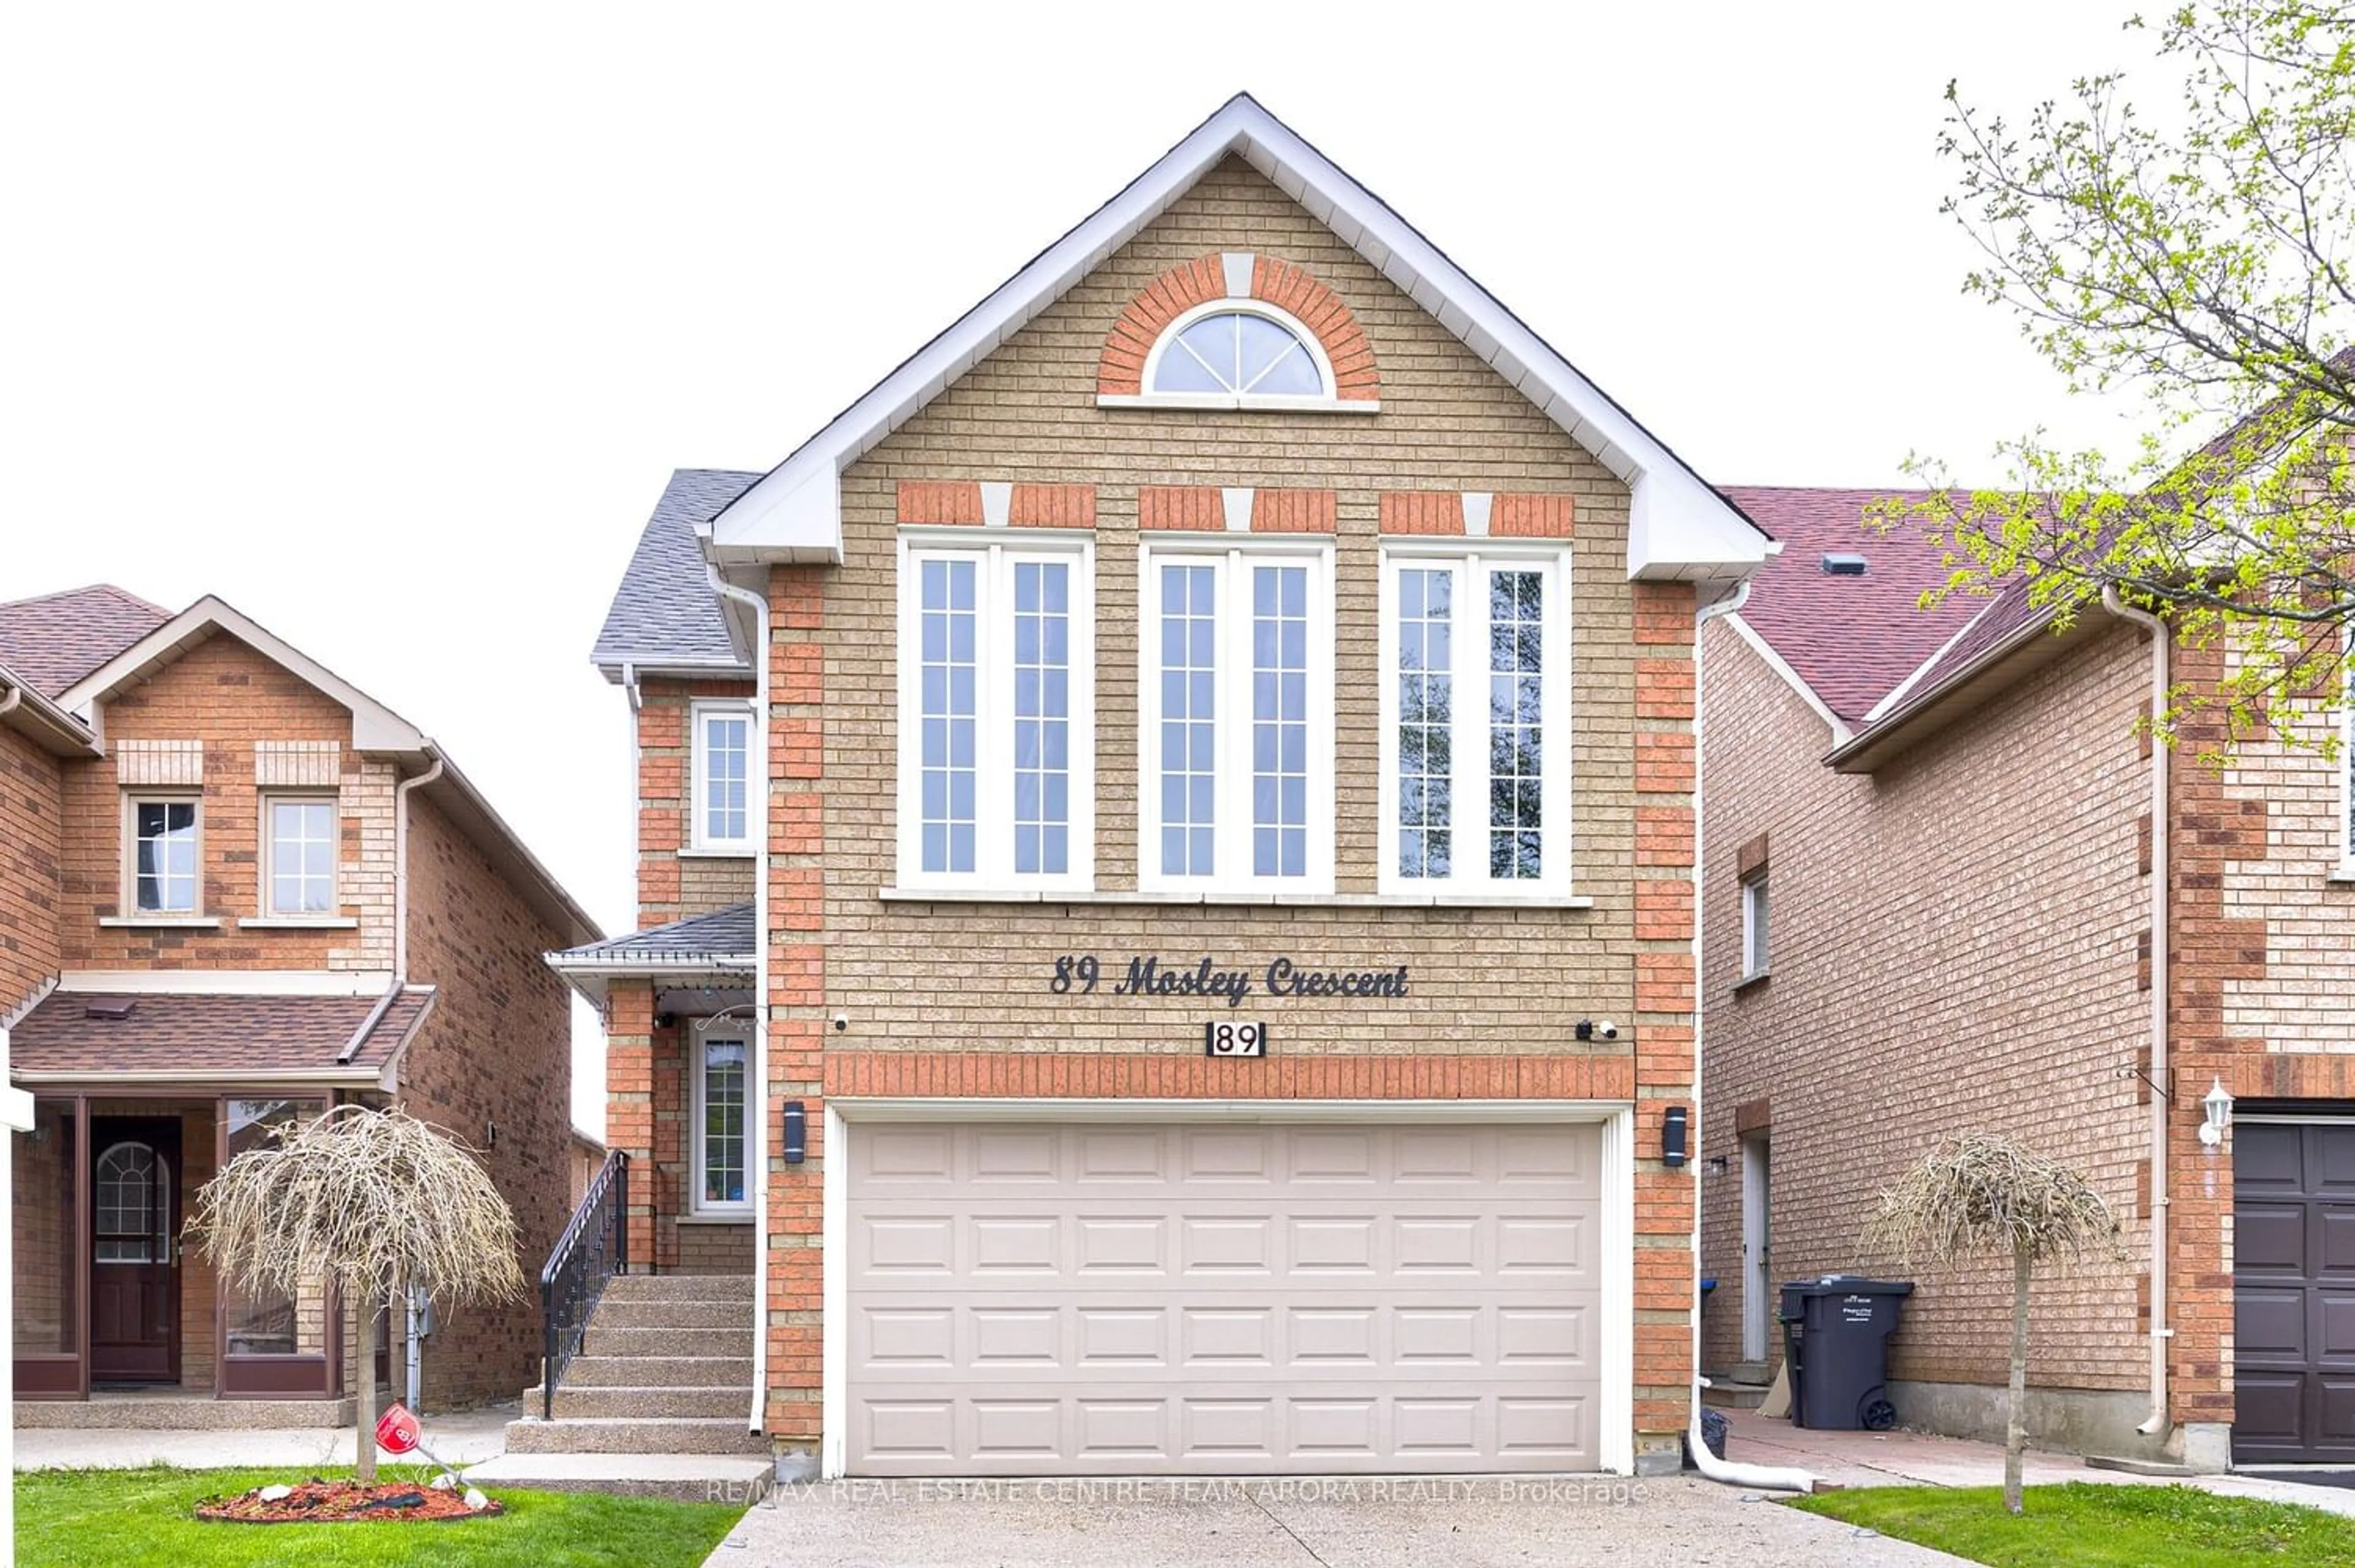 Home with brick exterior material for 89 Mosley Cres, Brampton Ontario L6Y 5C7